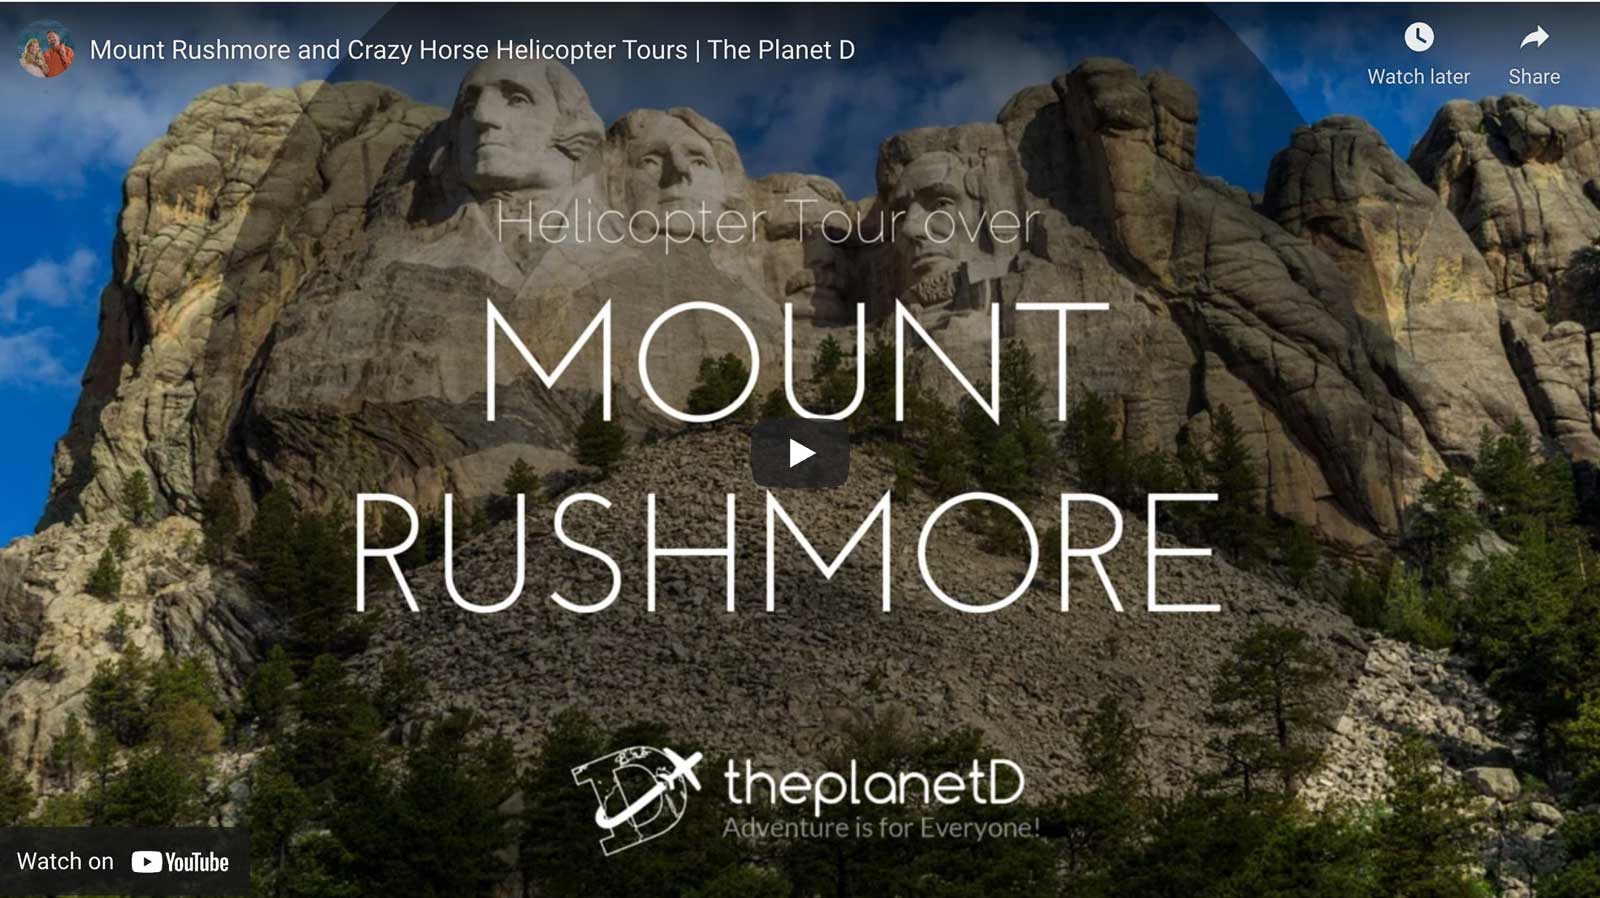 crazy horse memorial and mount rushmore helicopter tour